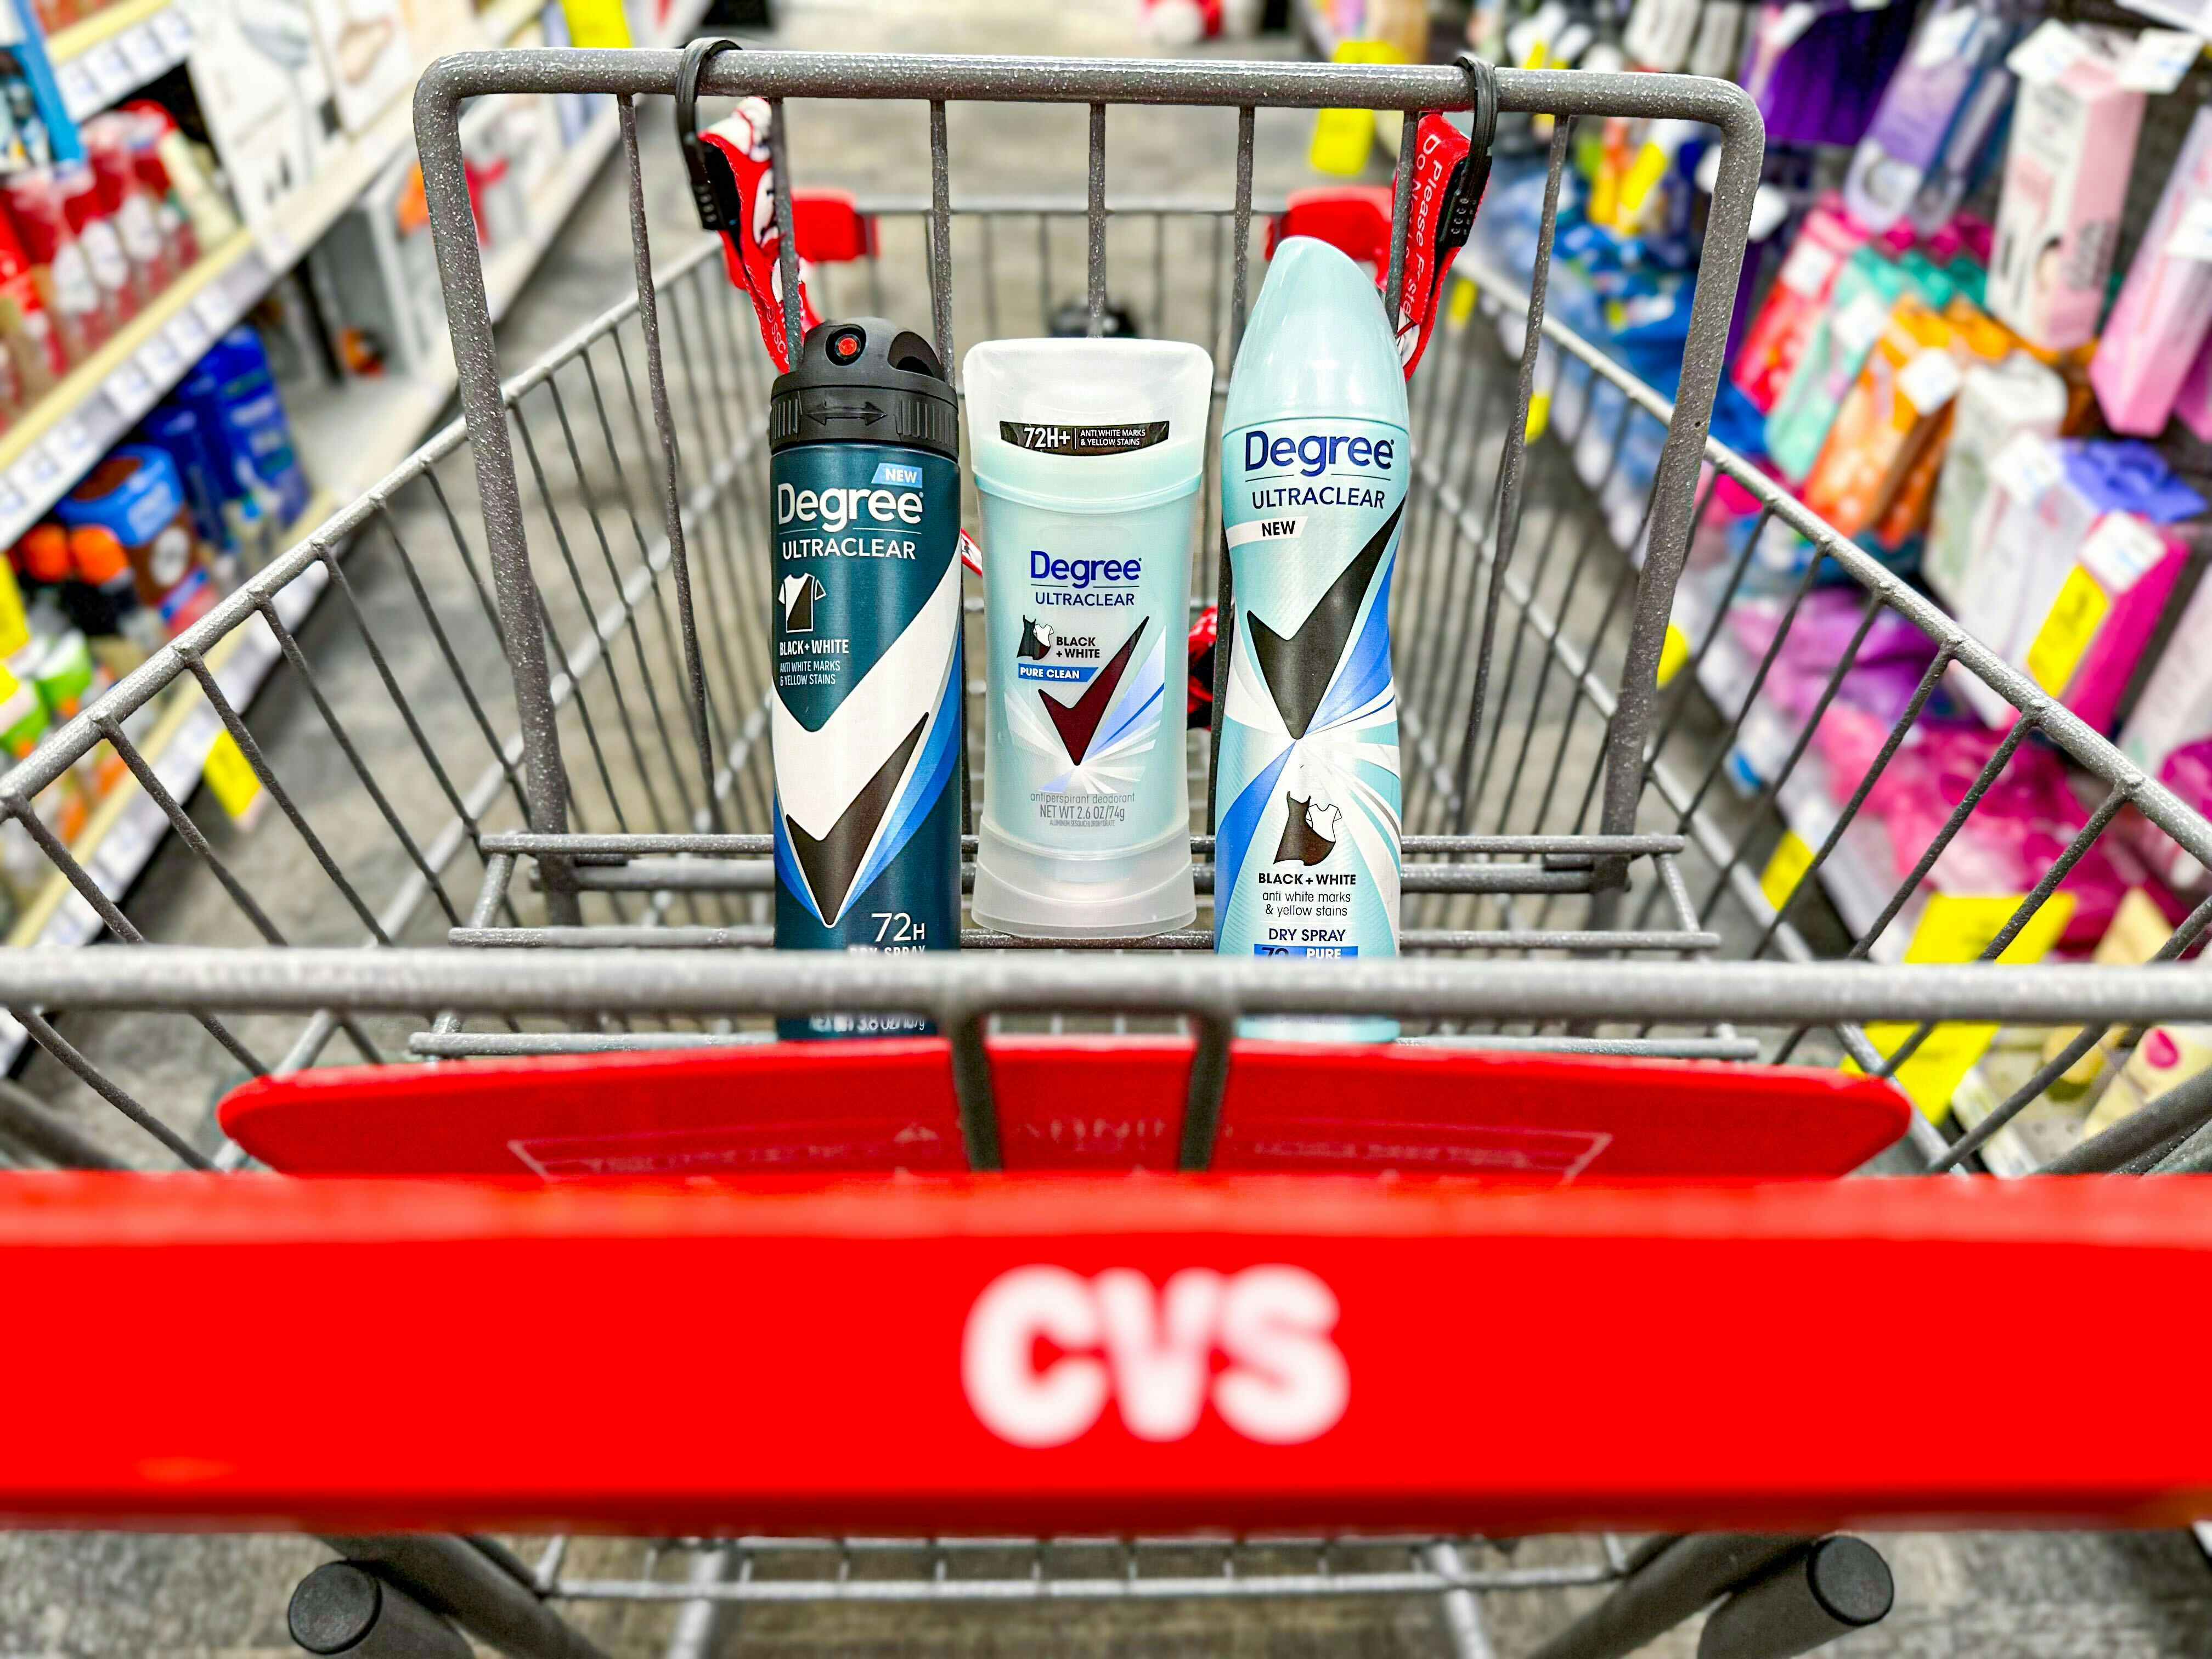 Get Up to 76% Off Degree Deodorant at CVS